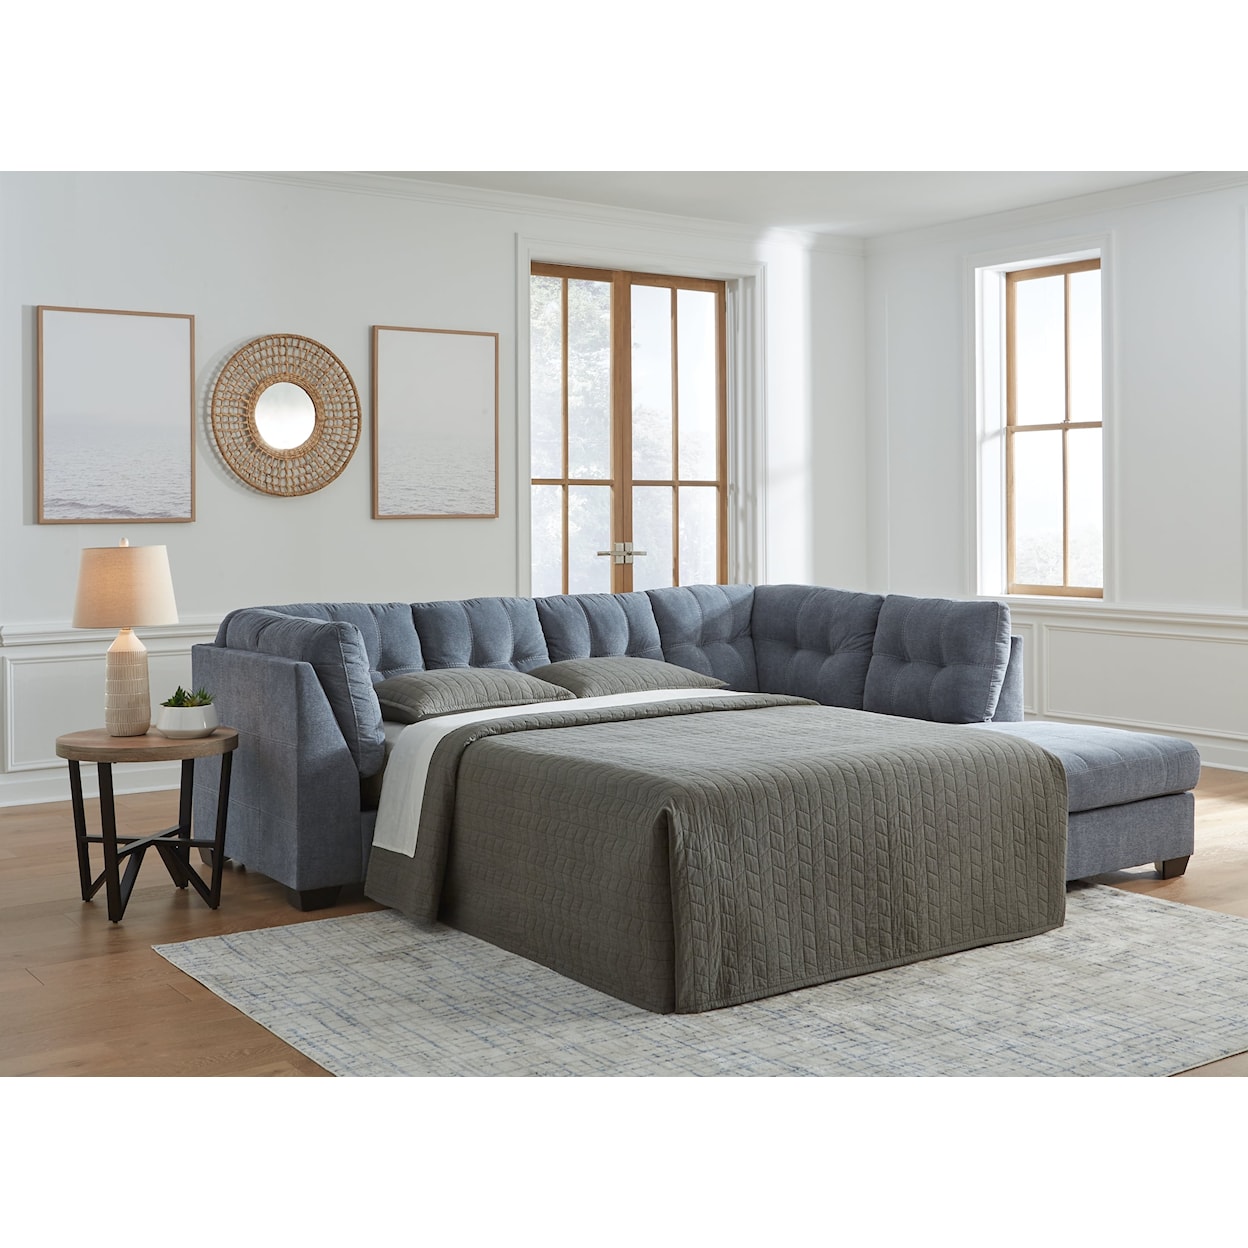 Signature Design by Ashley Furniture Marleton 2-Piece Sleeper Sectional with Chaise